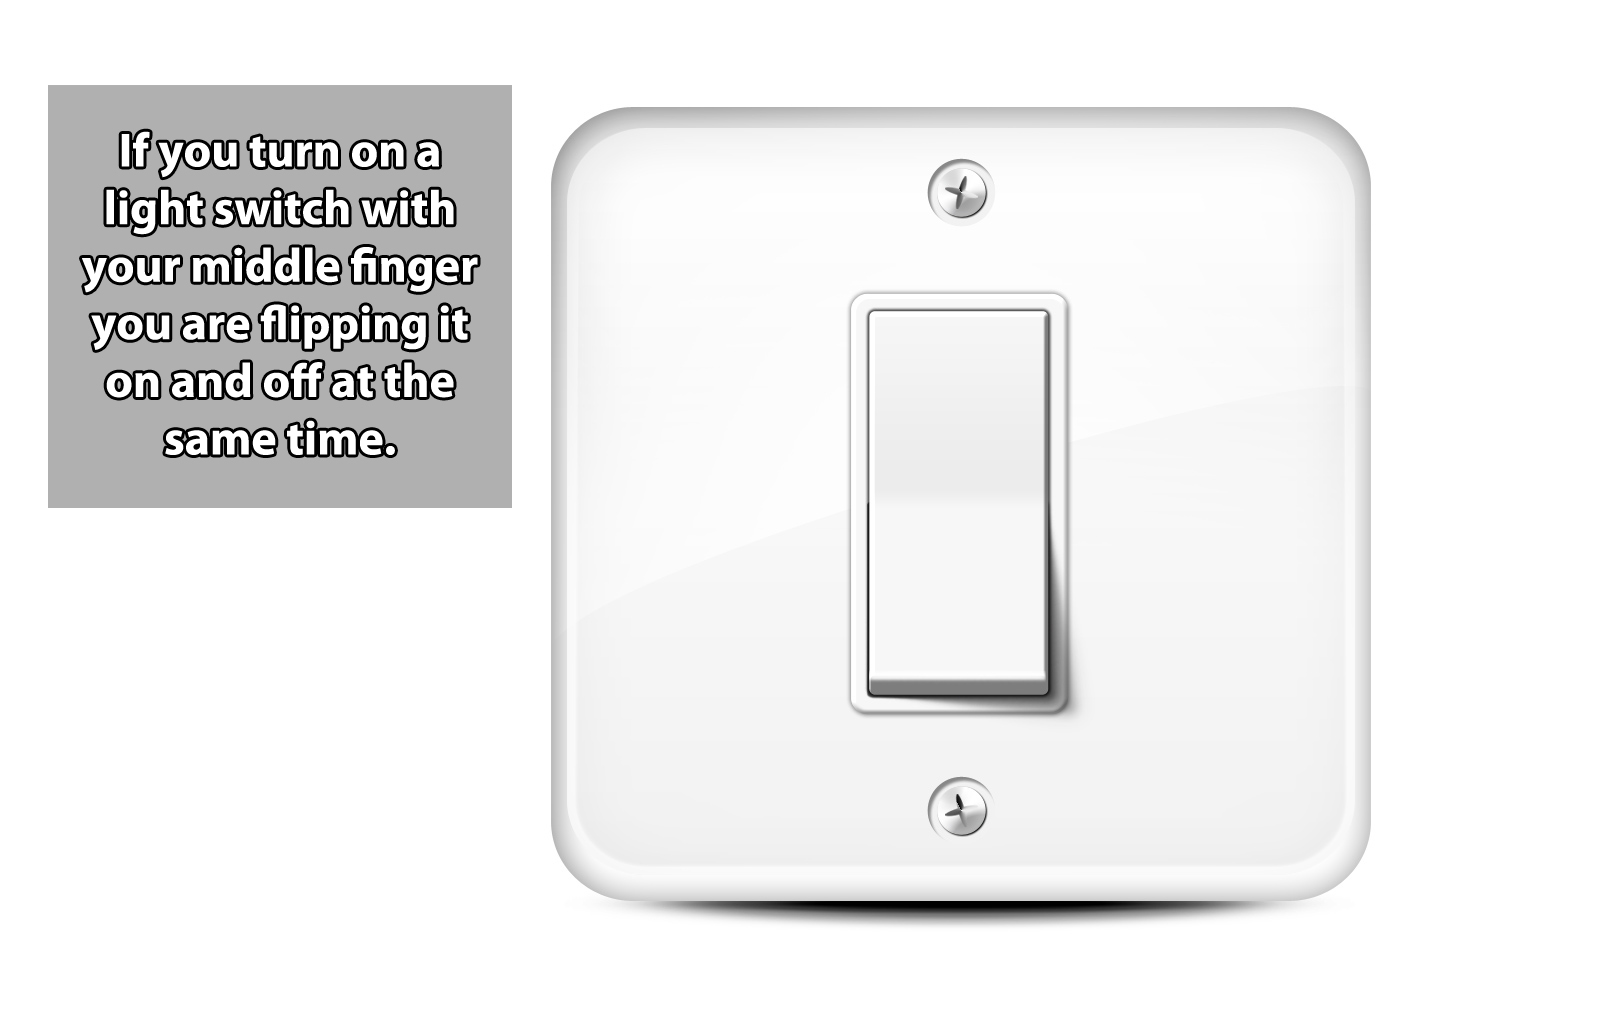 light switch - If you turn on a light switch with your middle finger you are flipping it on and off at the same time.